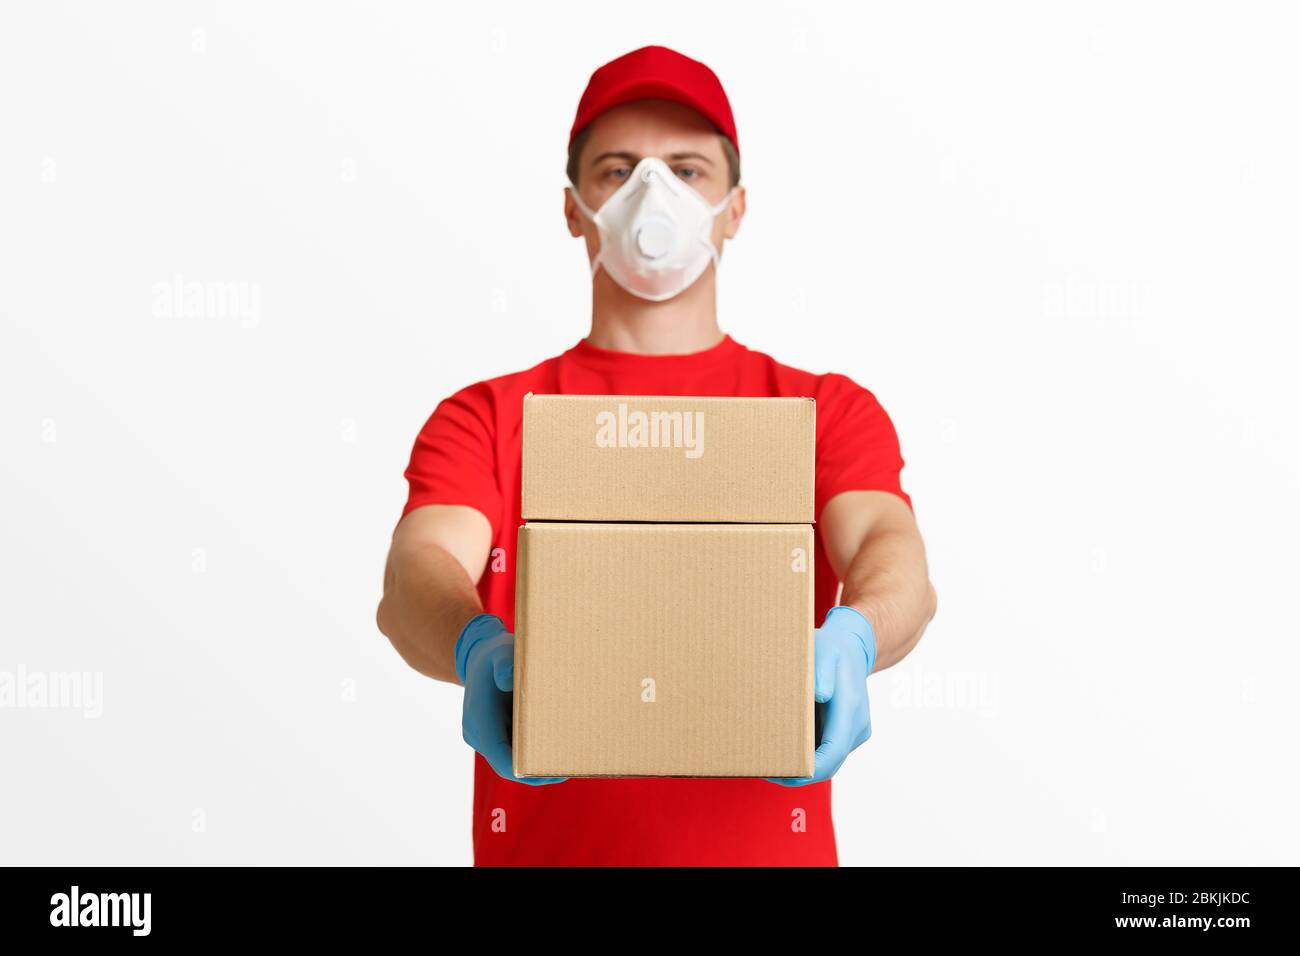 Delivery services. Courier in red uniform gives box Stock Photo